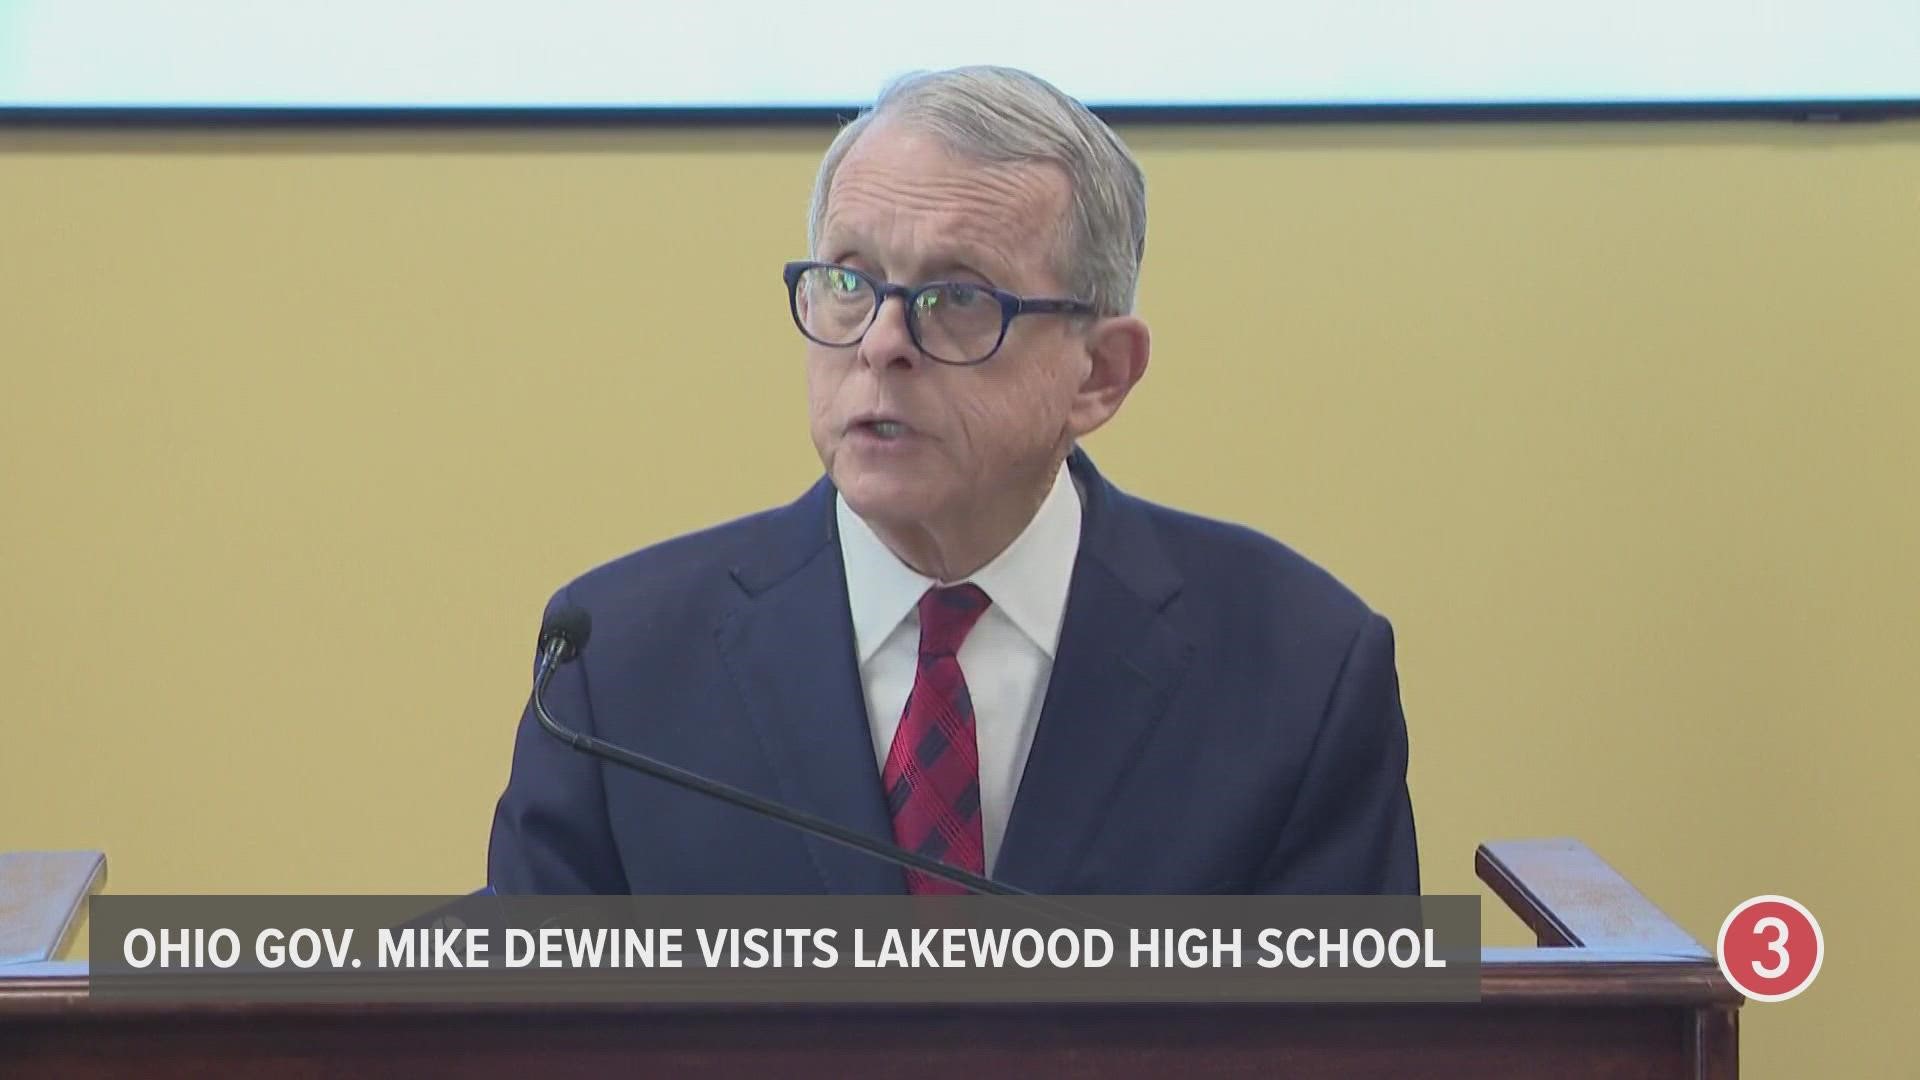 The Lakewood school district is among those receiving money in the form of $1 million for safety.